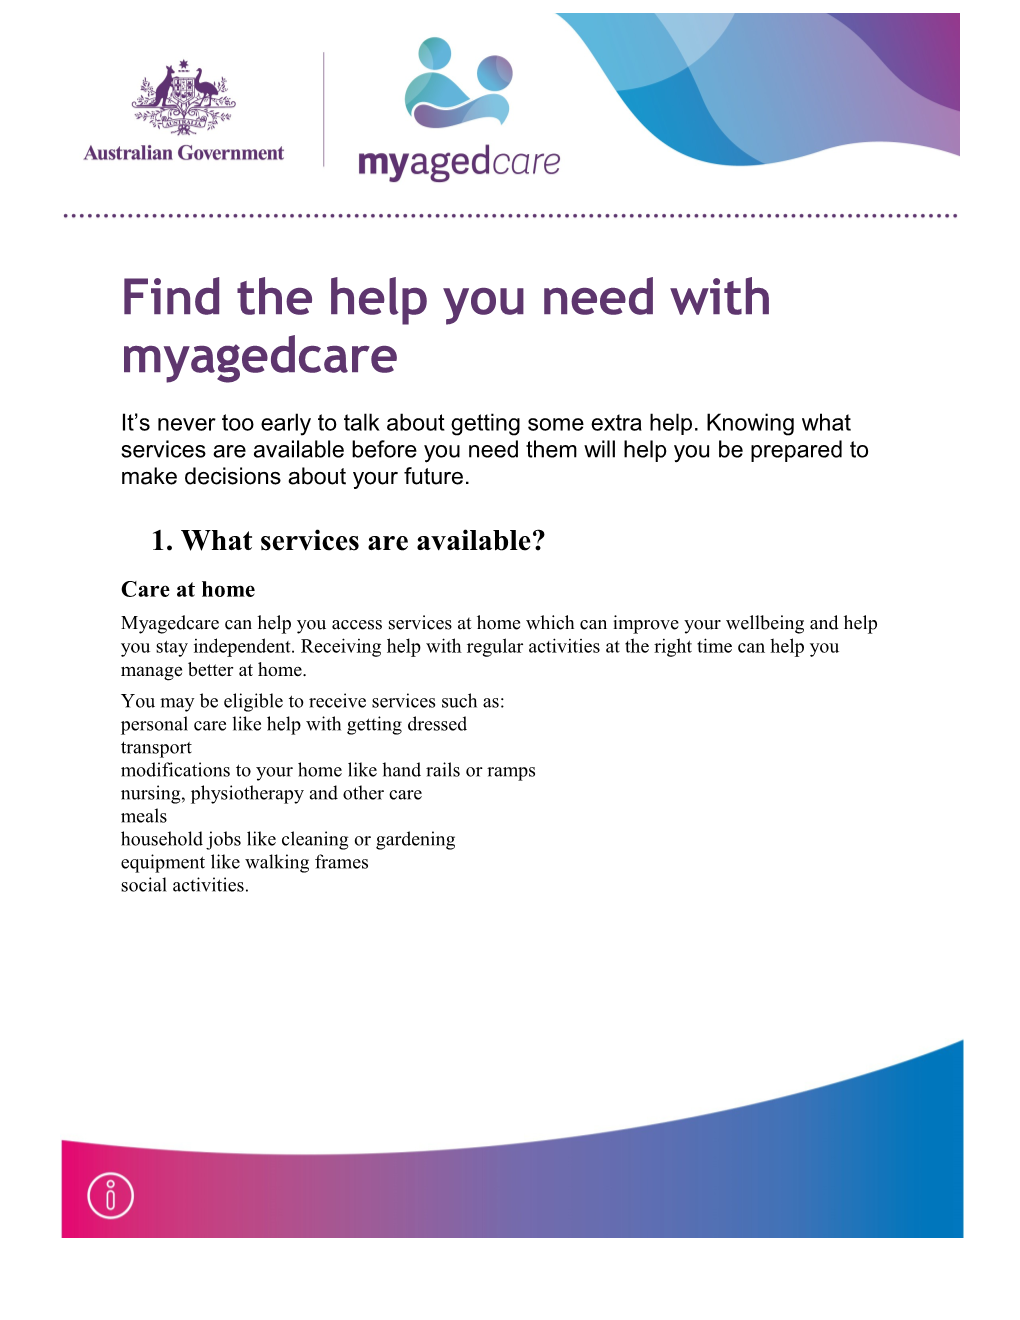 Find the Help You Need with Myagedcare